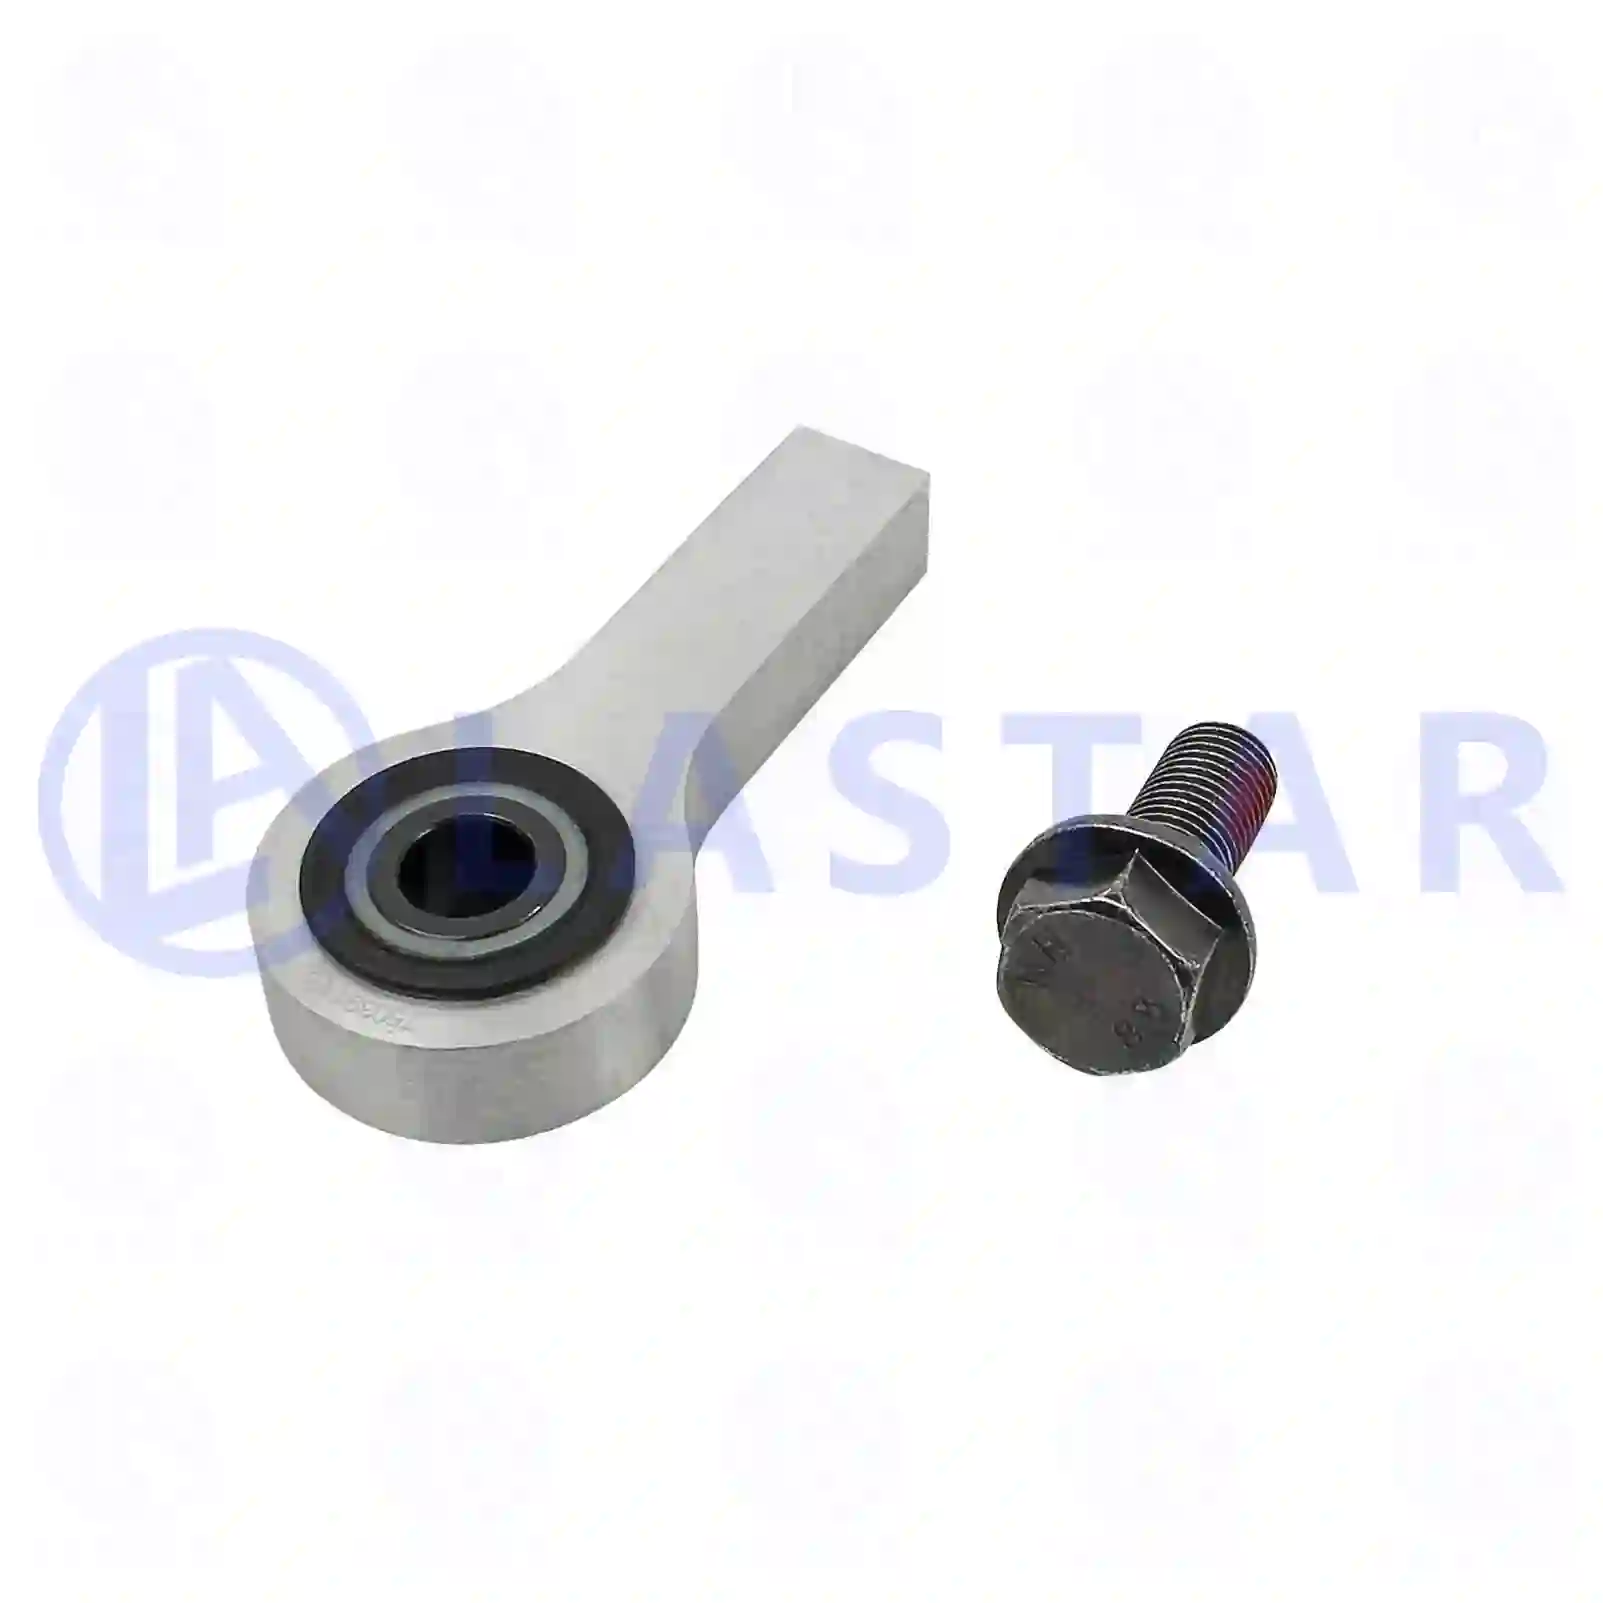  Bearing joint, complete with seal rings || Lastar Spare Part | Truck Spare Parts, Auotomotive Spare Parts